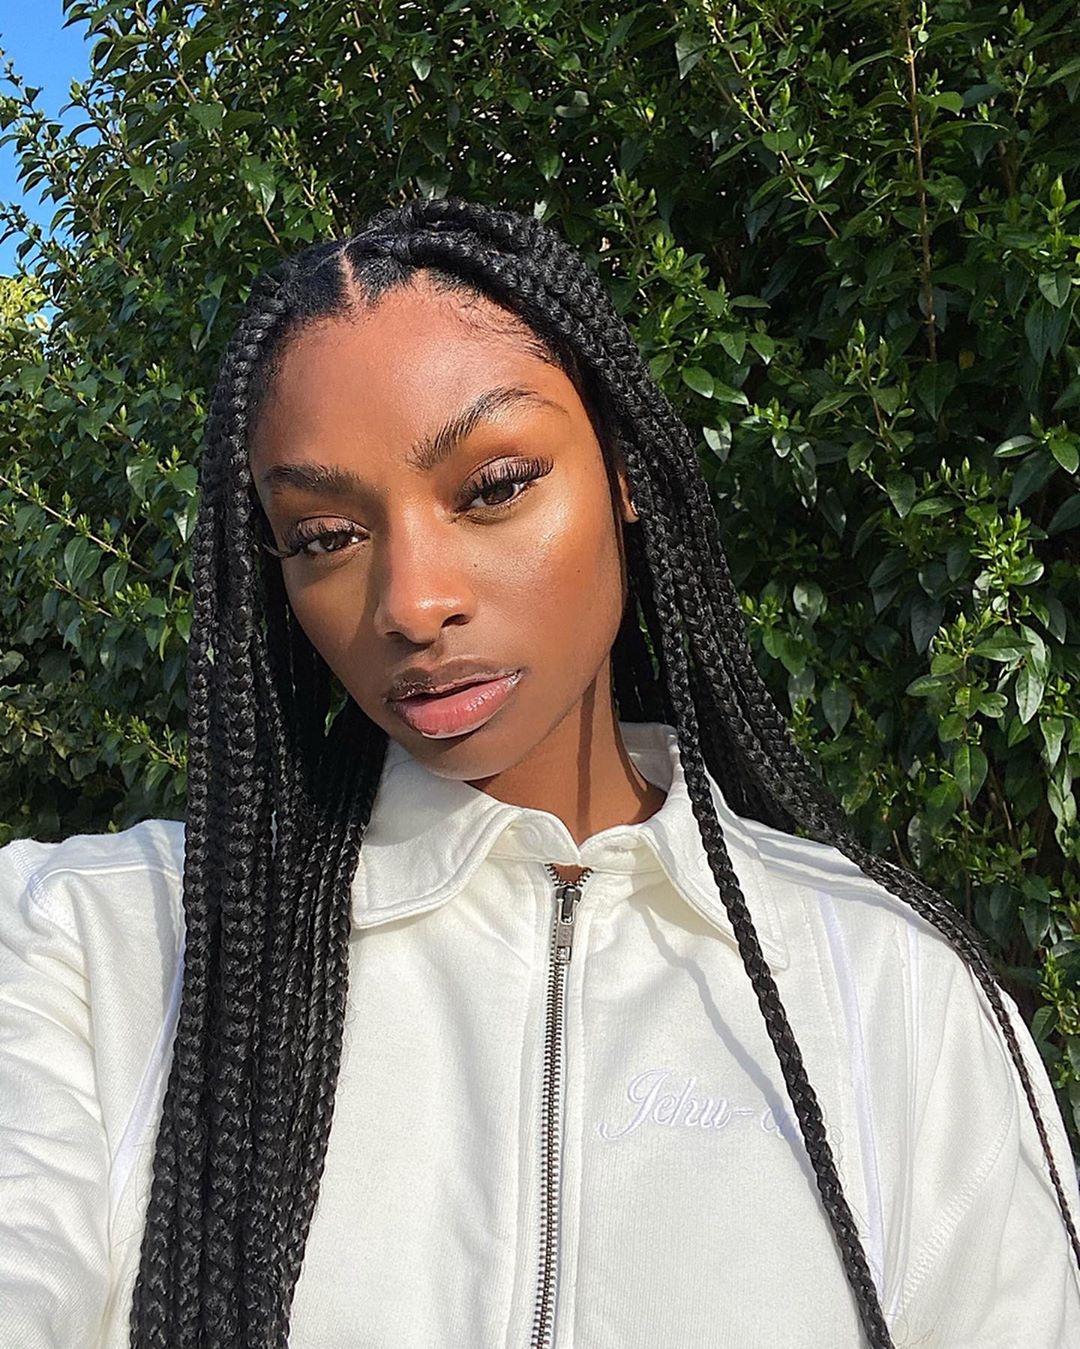 The Jumbo Knotless Braid Leads The Braided Hairstyles Trending RN